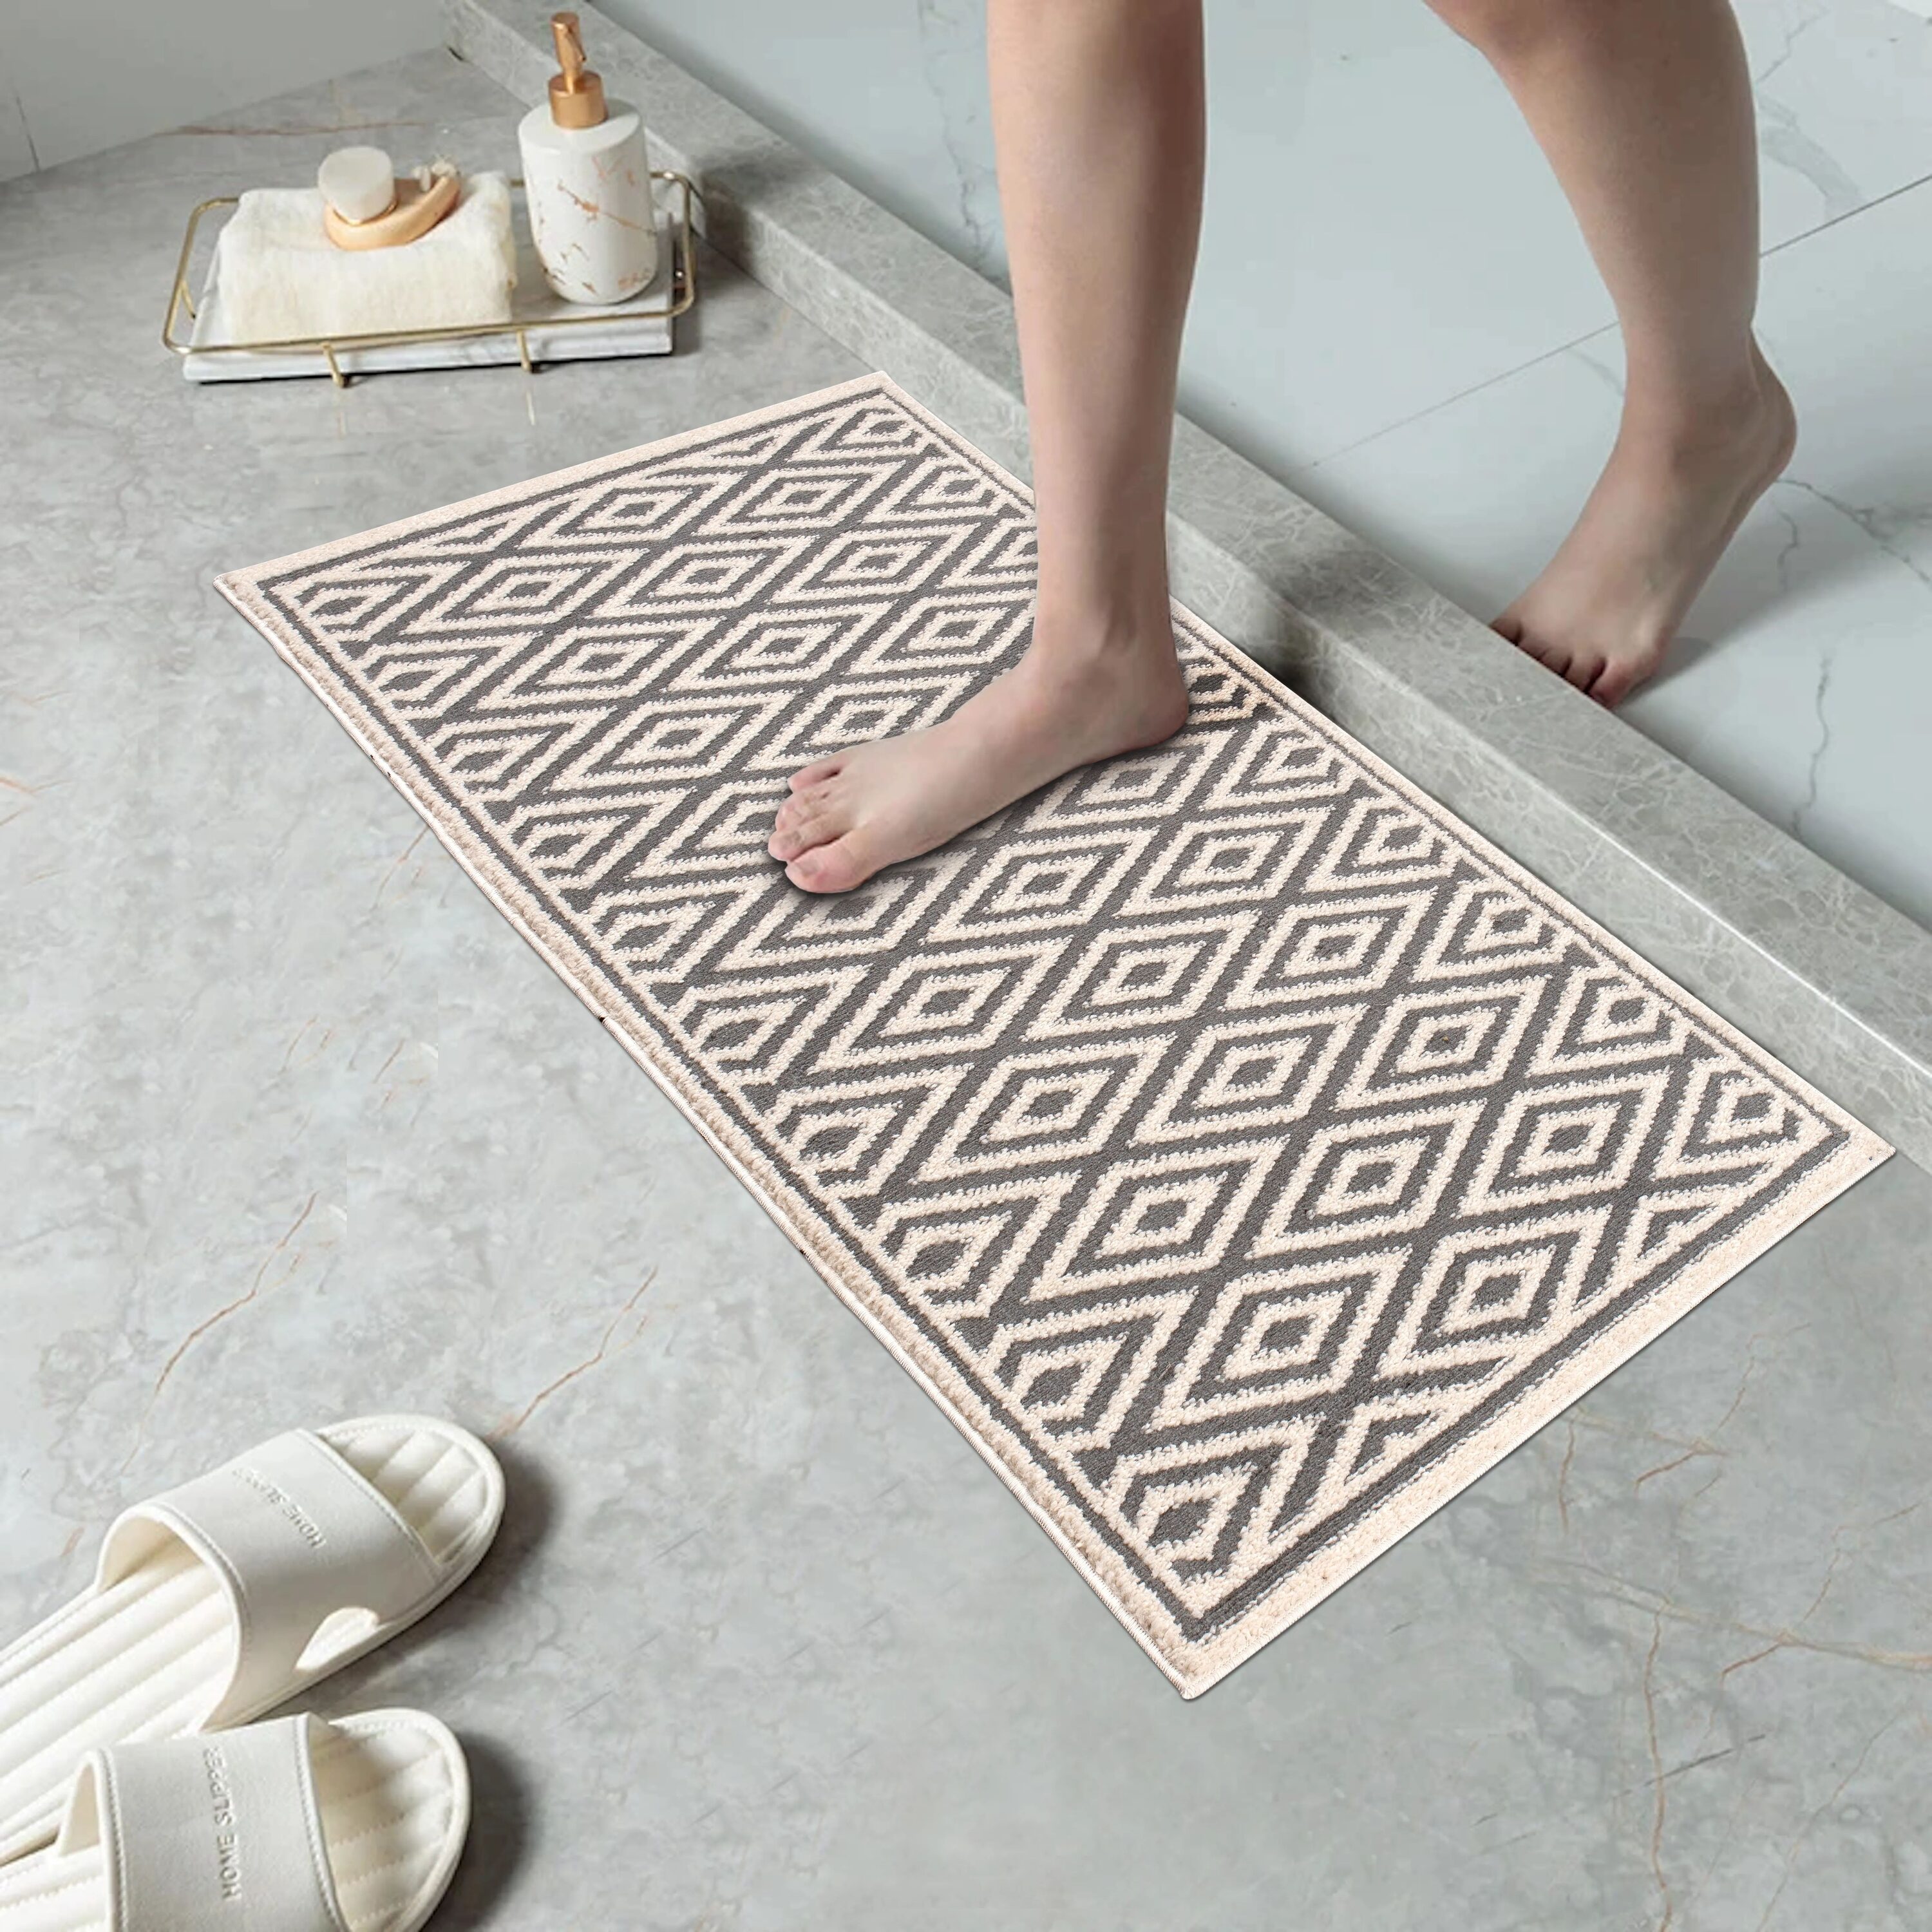 The Sofia Rugs Kitchen Runner Rug 24-in White Polypropylene Bath Mat Set in  the Bathroom Rugs & Mats department at